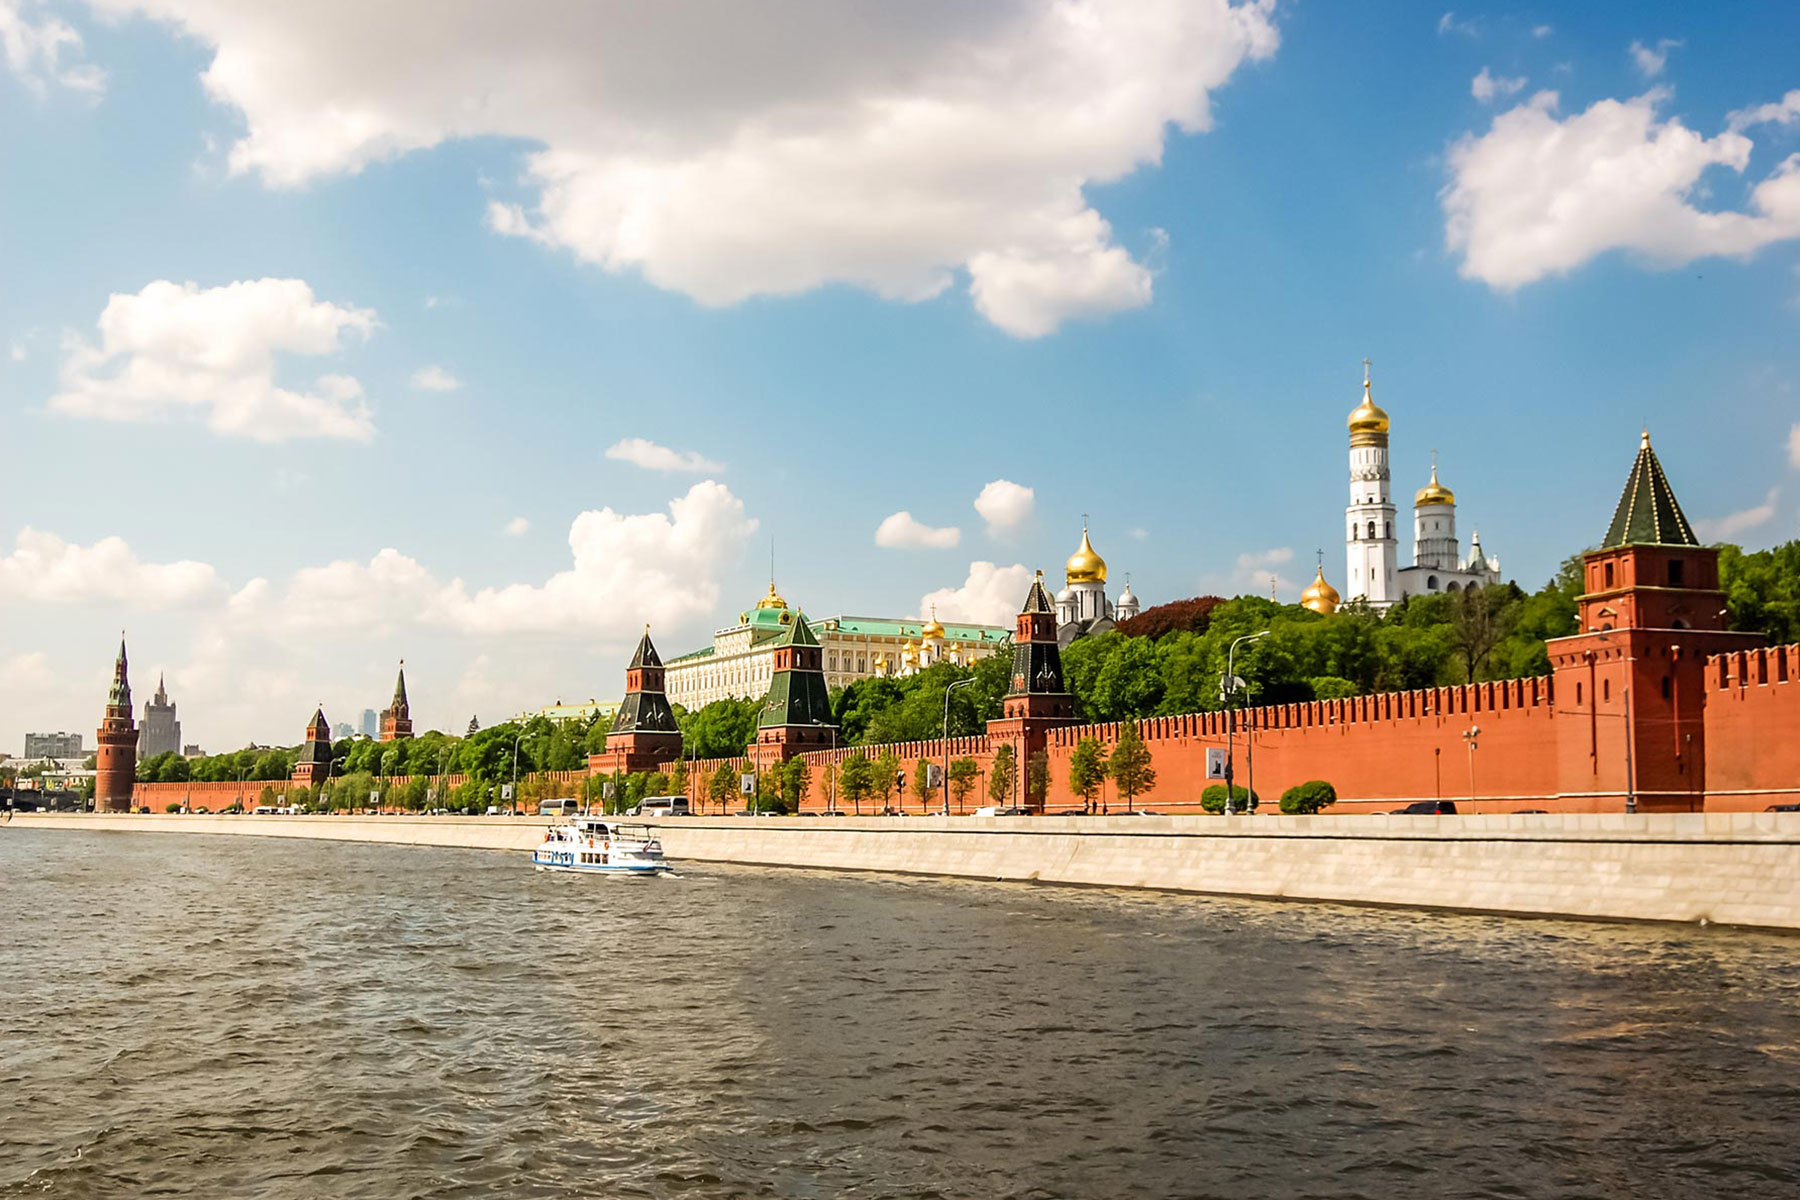 the-kremlin-on-the-banks-of-the-moscow-river-M4HDV79-1.jpg